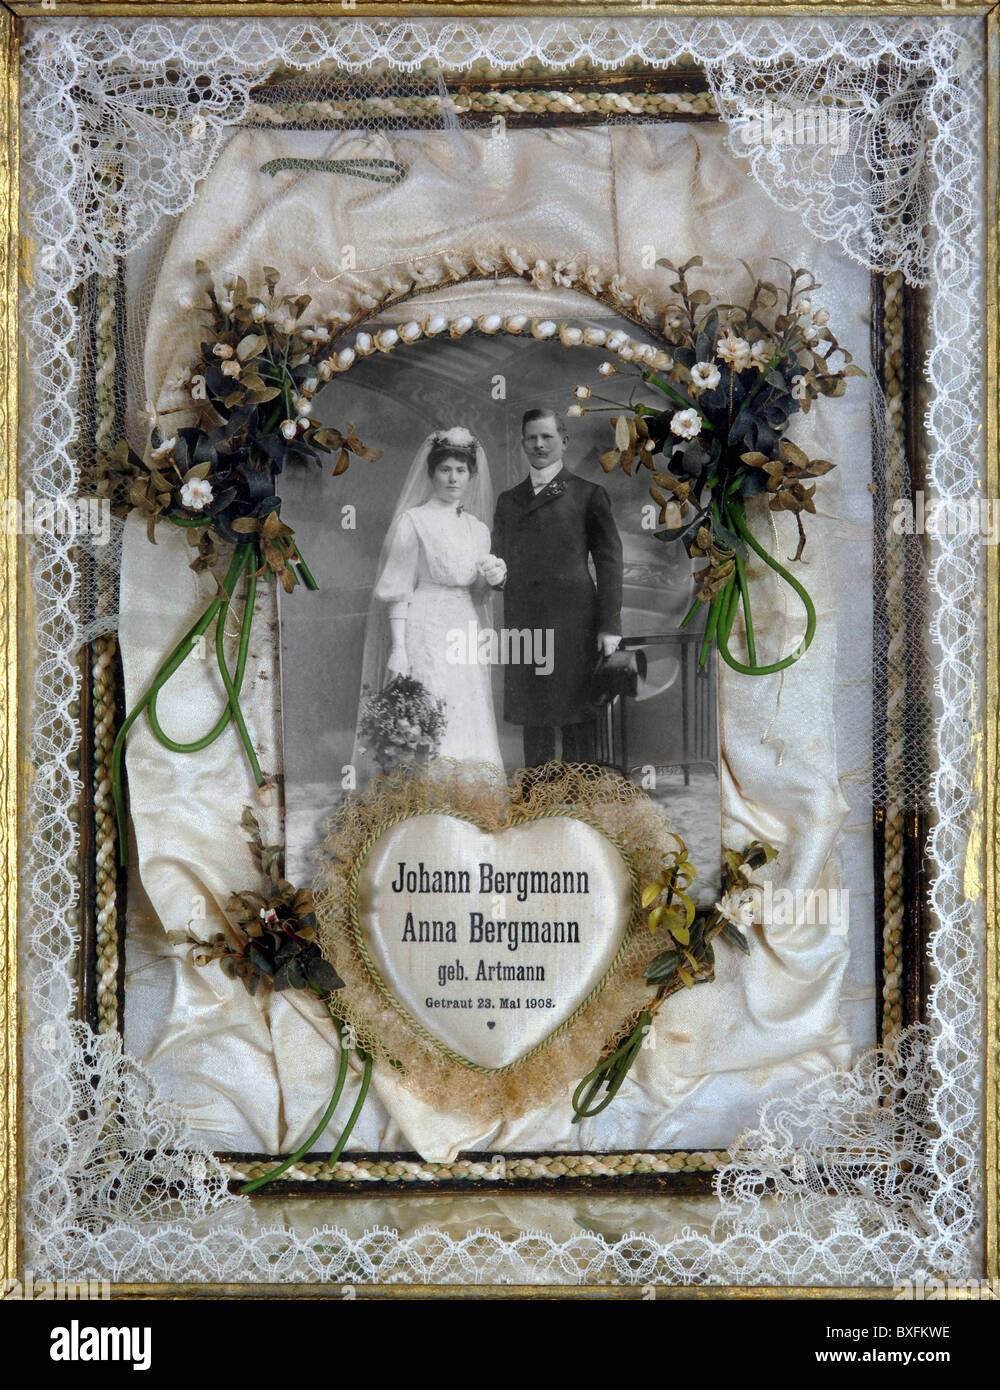 people, couples, bridal couple, bride and groom, Germany, 1908, Additional-Rights-Clearences-Not Available Stock Photo